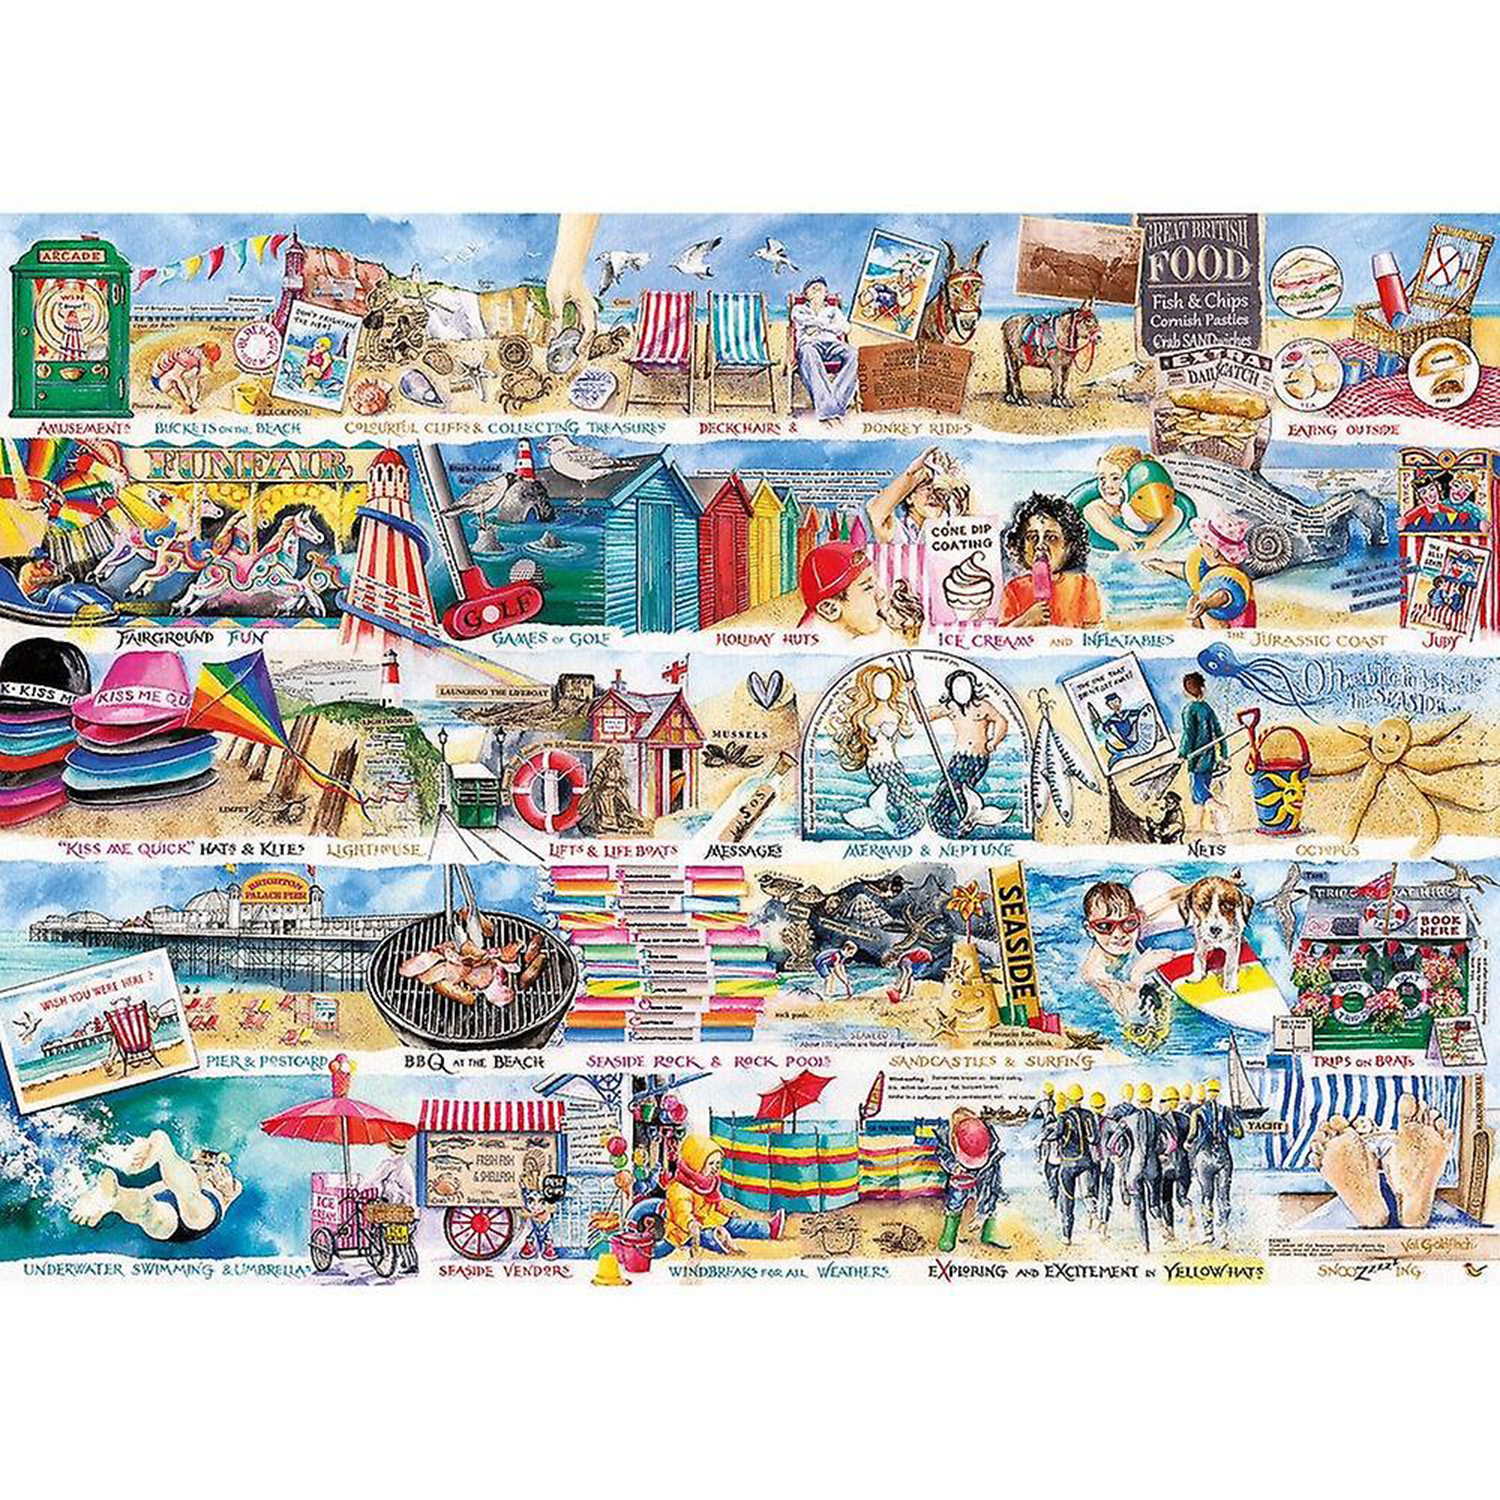 Deckchairs and Donkeys Collage Jigsaw Puzzle